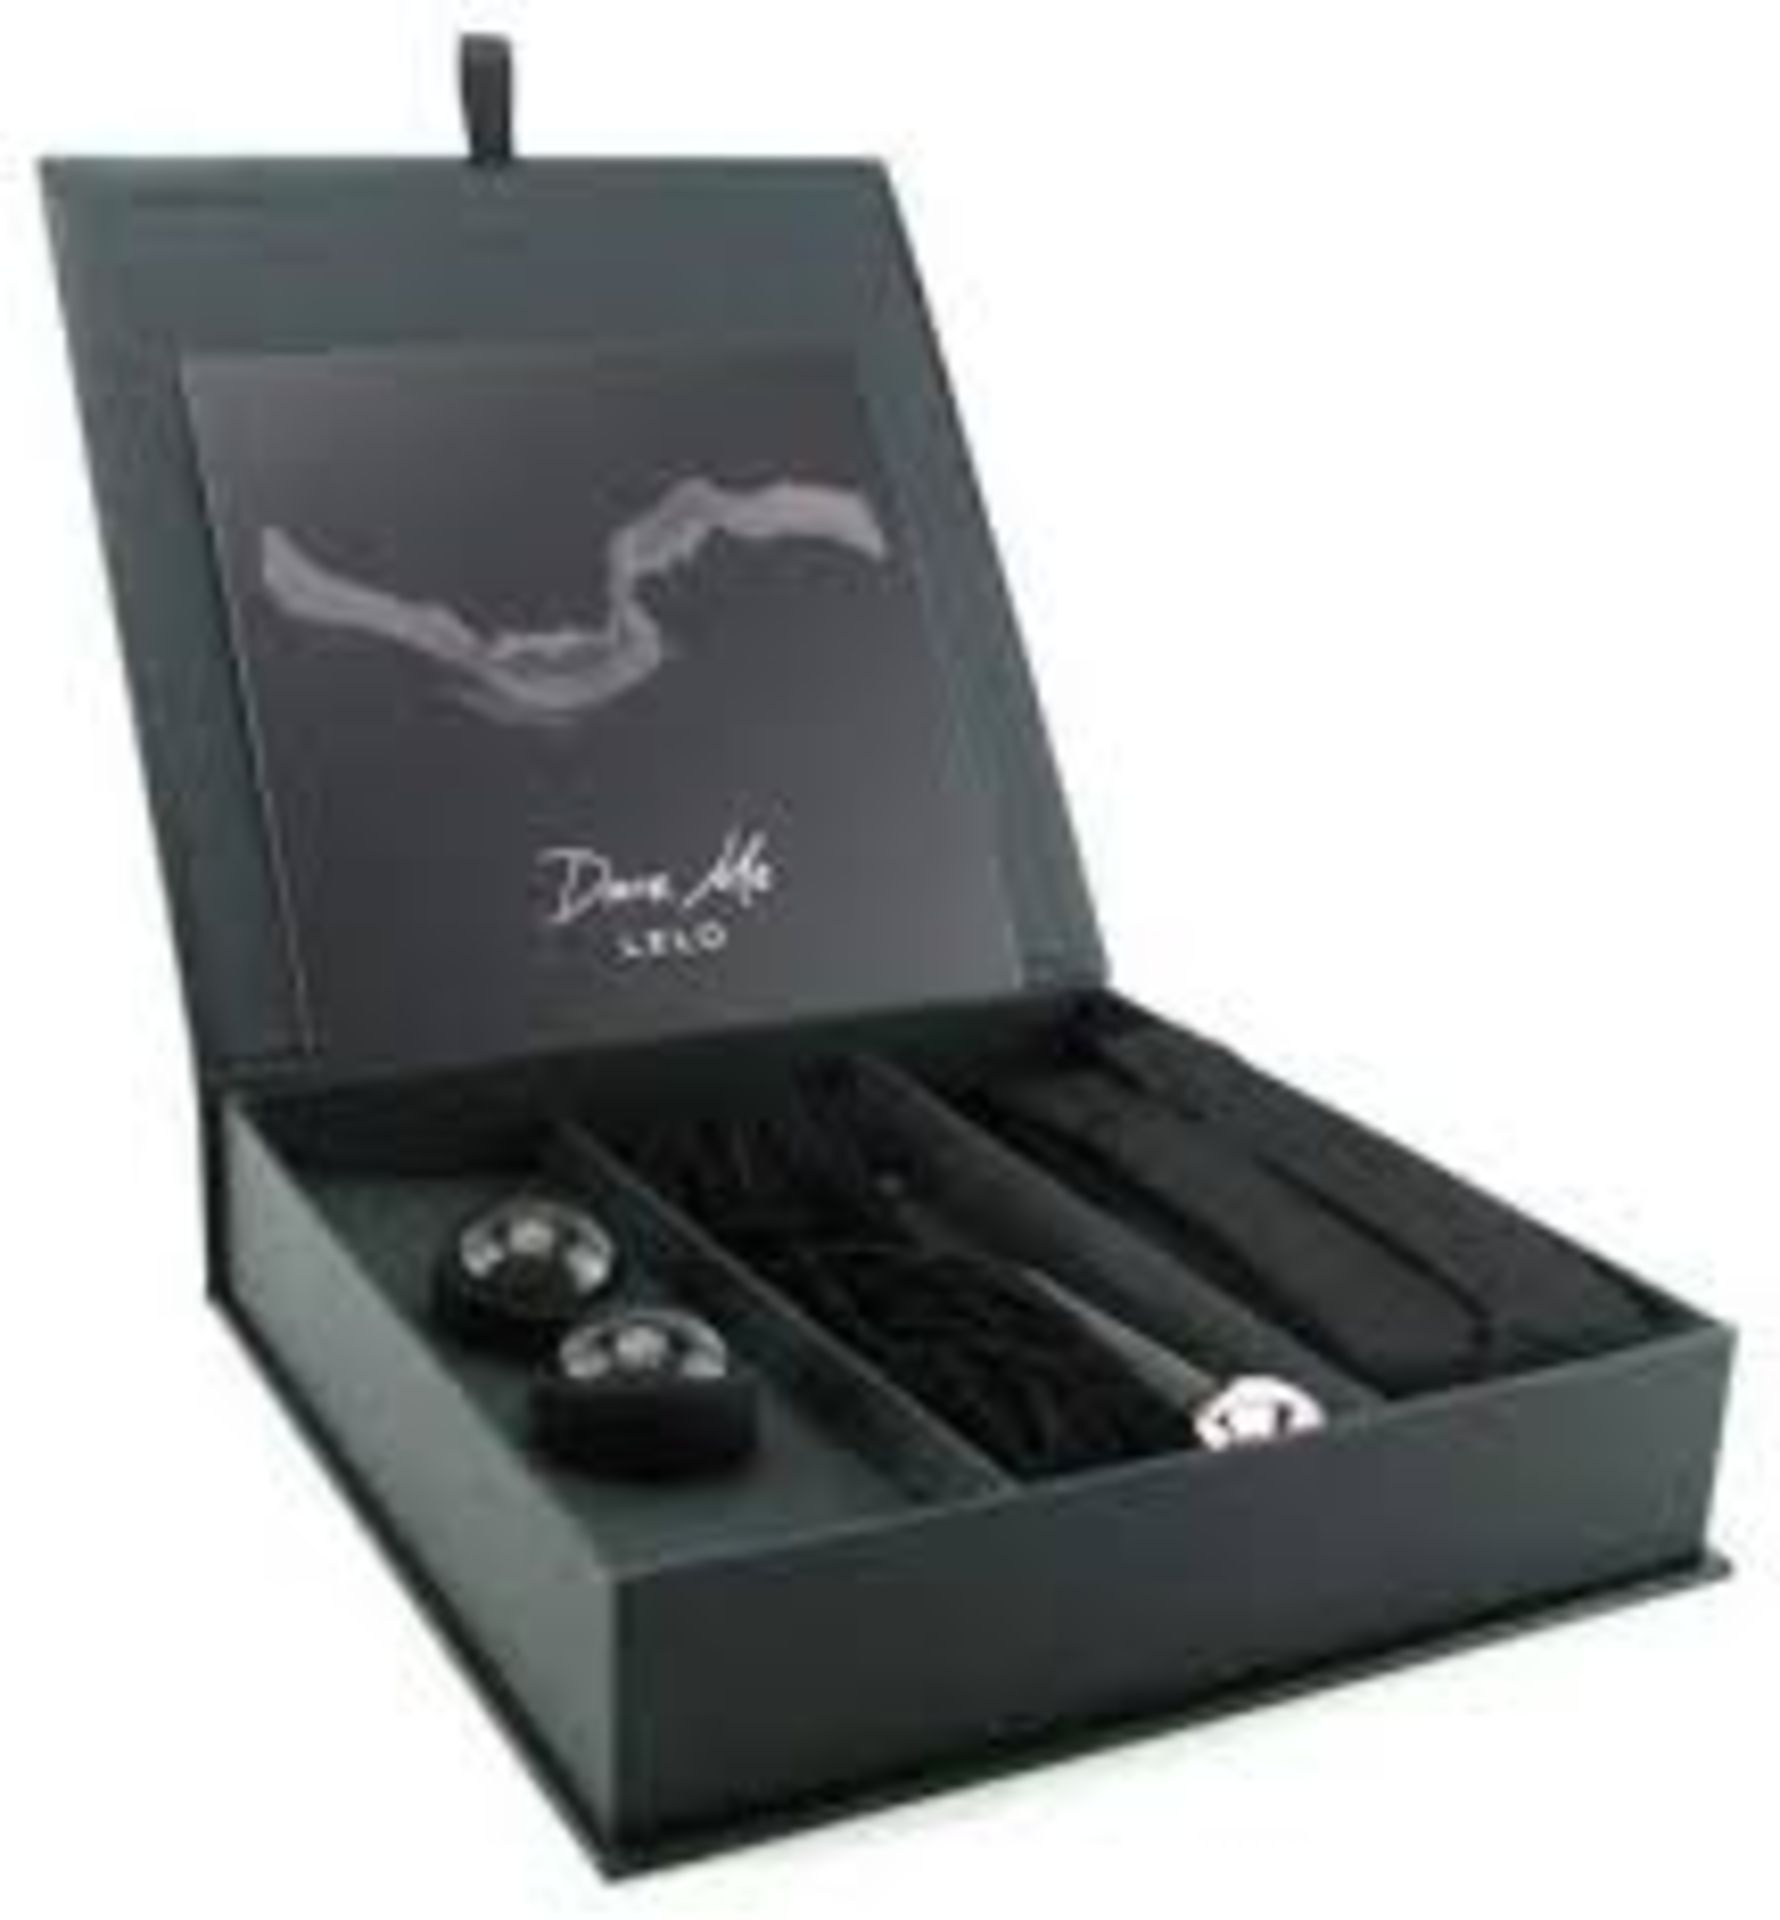 Boxed Brand New Dare Me Pleasure Set RRP £169 (Appraisals Are Available Upon Request)(Pictures Are